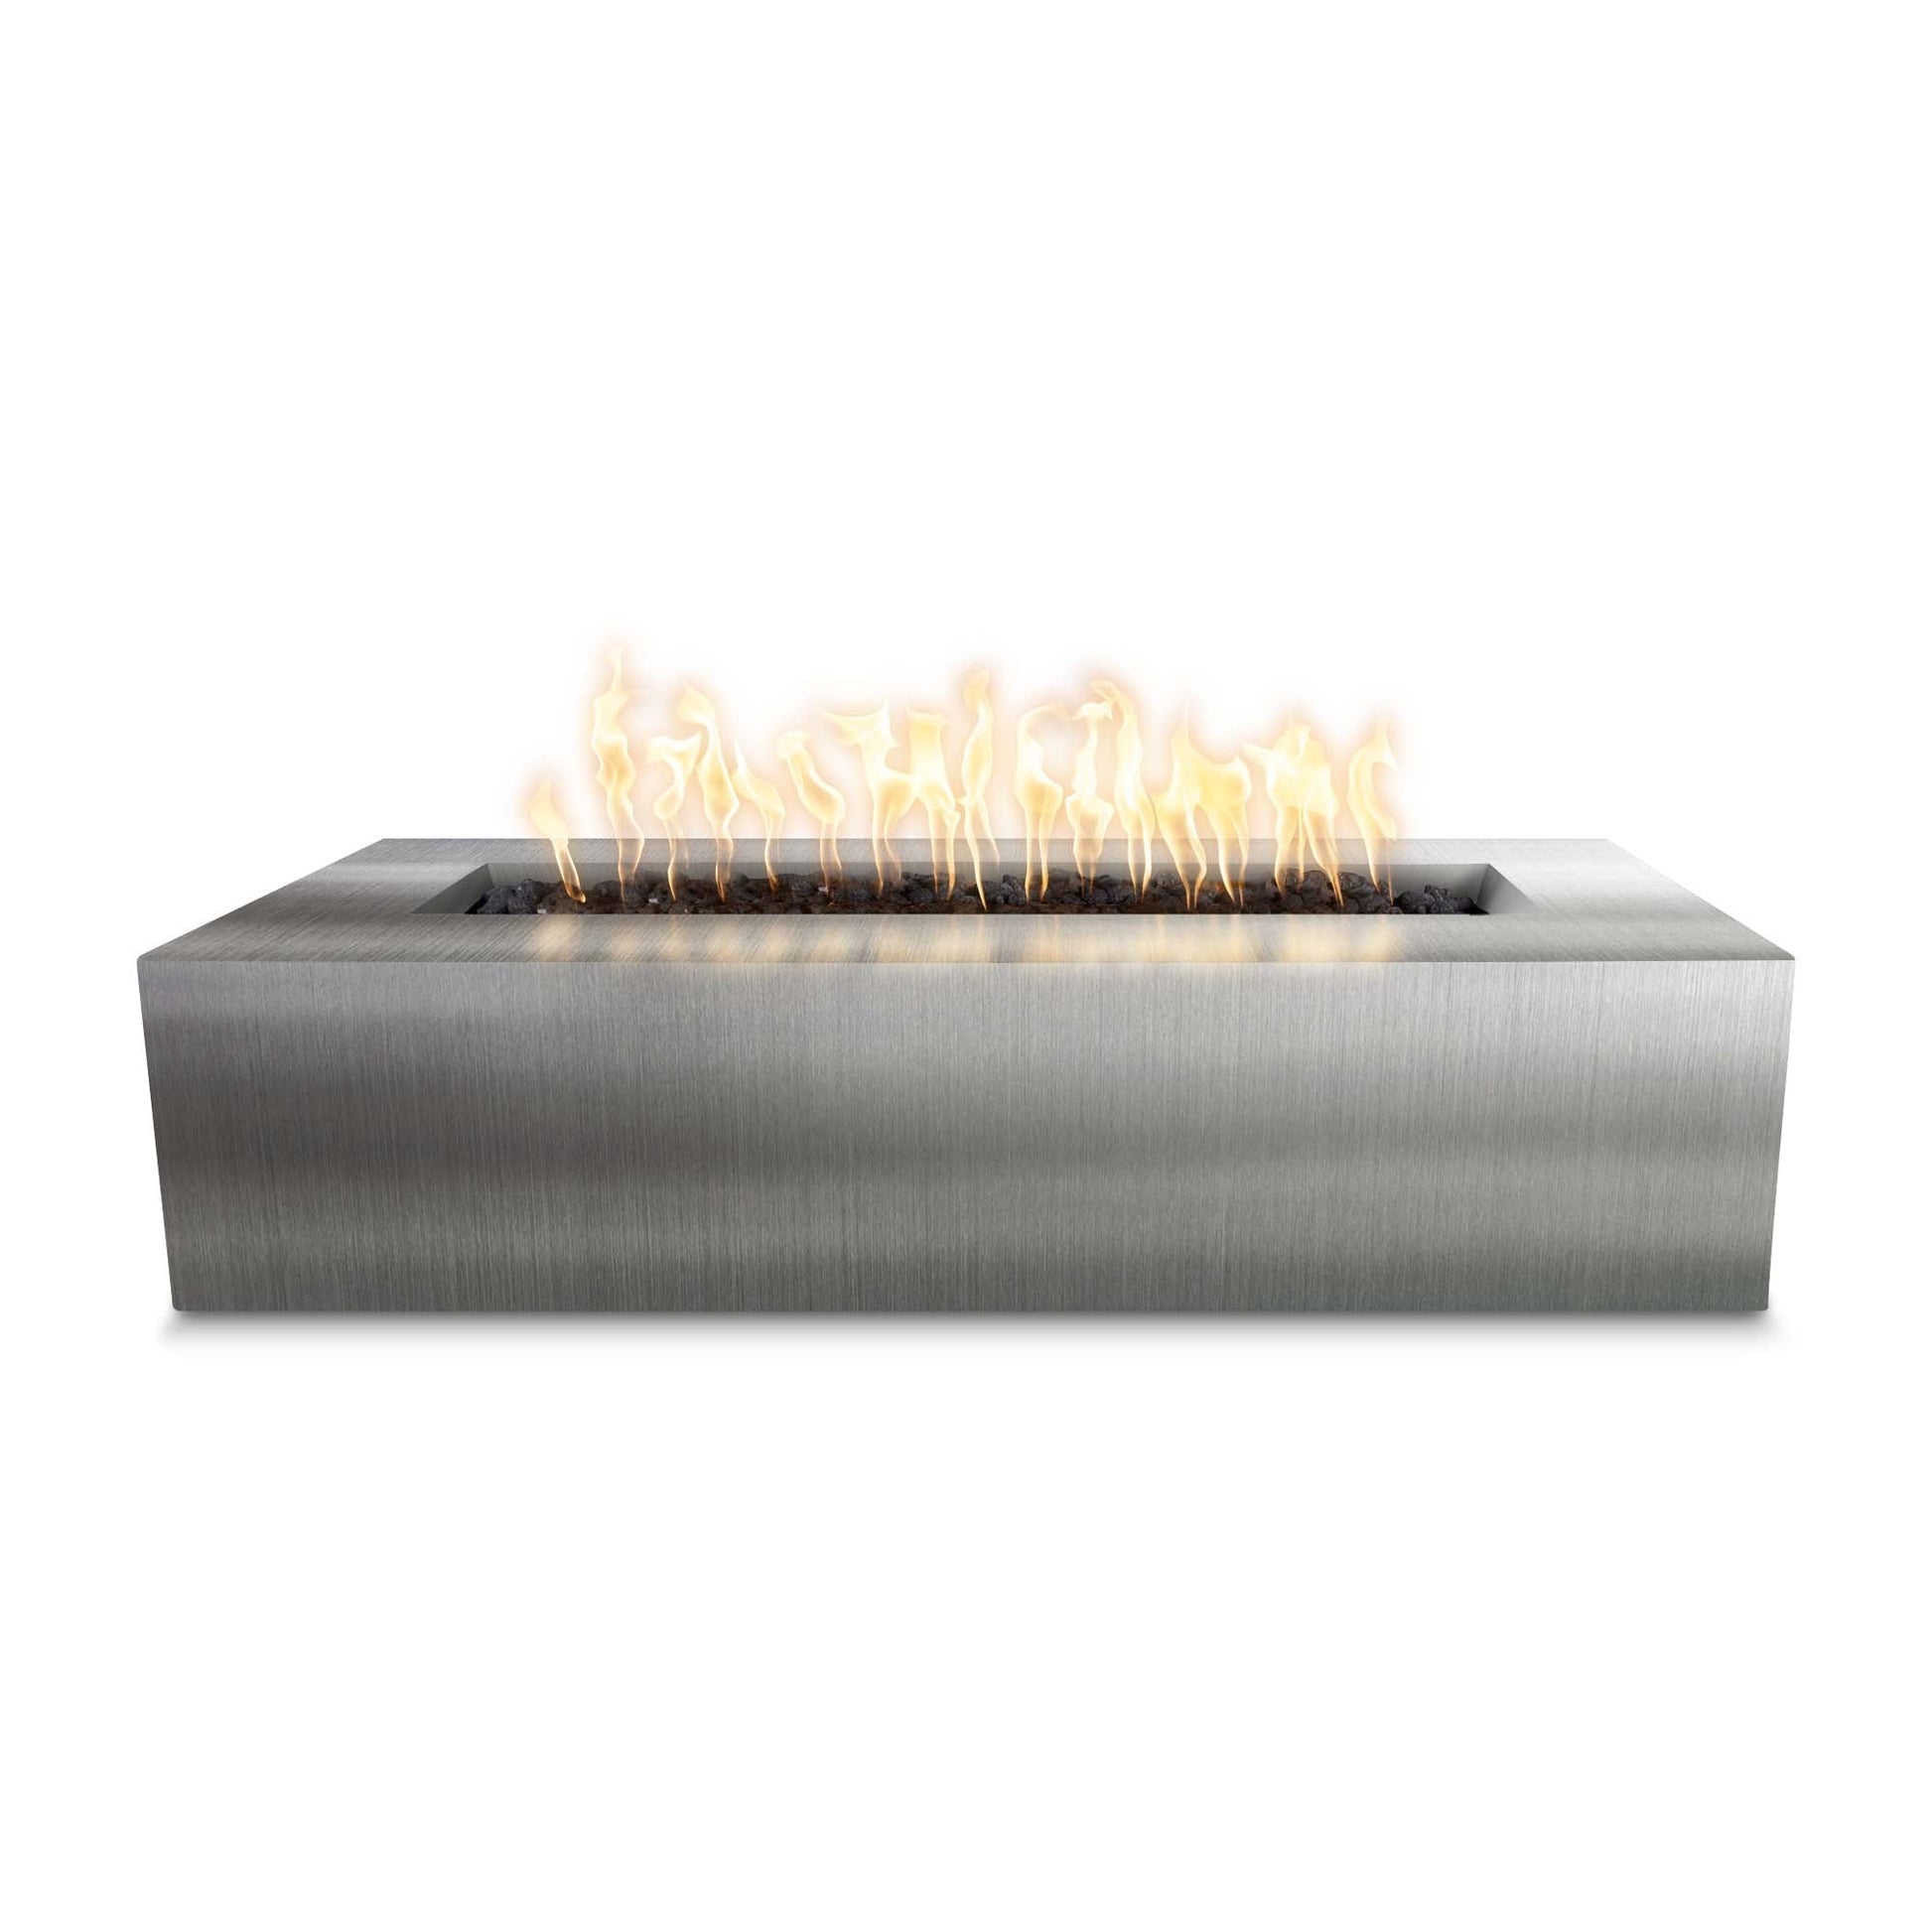 The Outdoor Plus Rectangular Regal 60" Hammered Copper Natural Gas Fire Pit with 110V Electronic Ignition